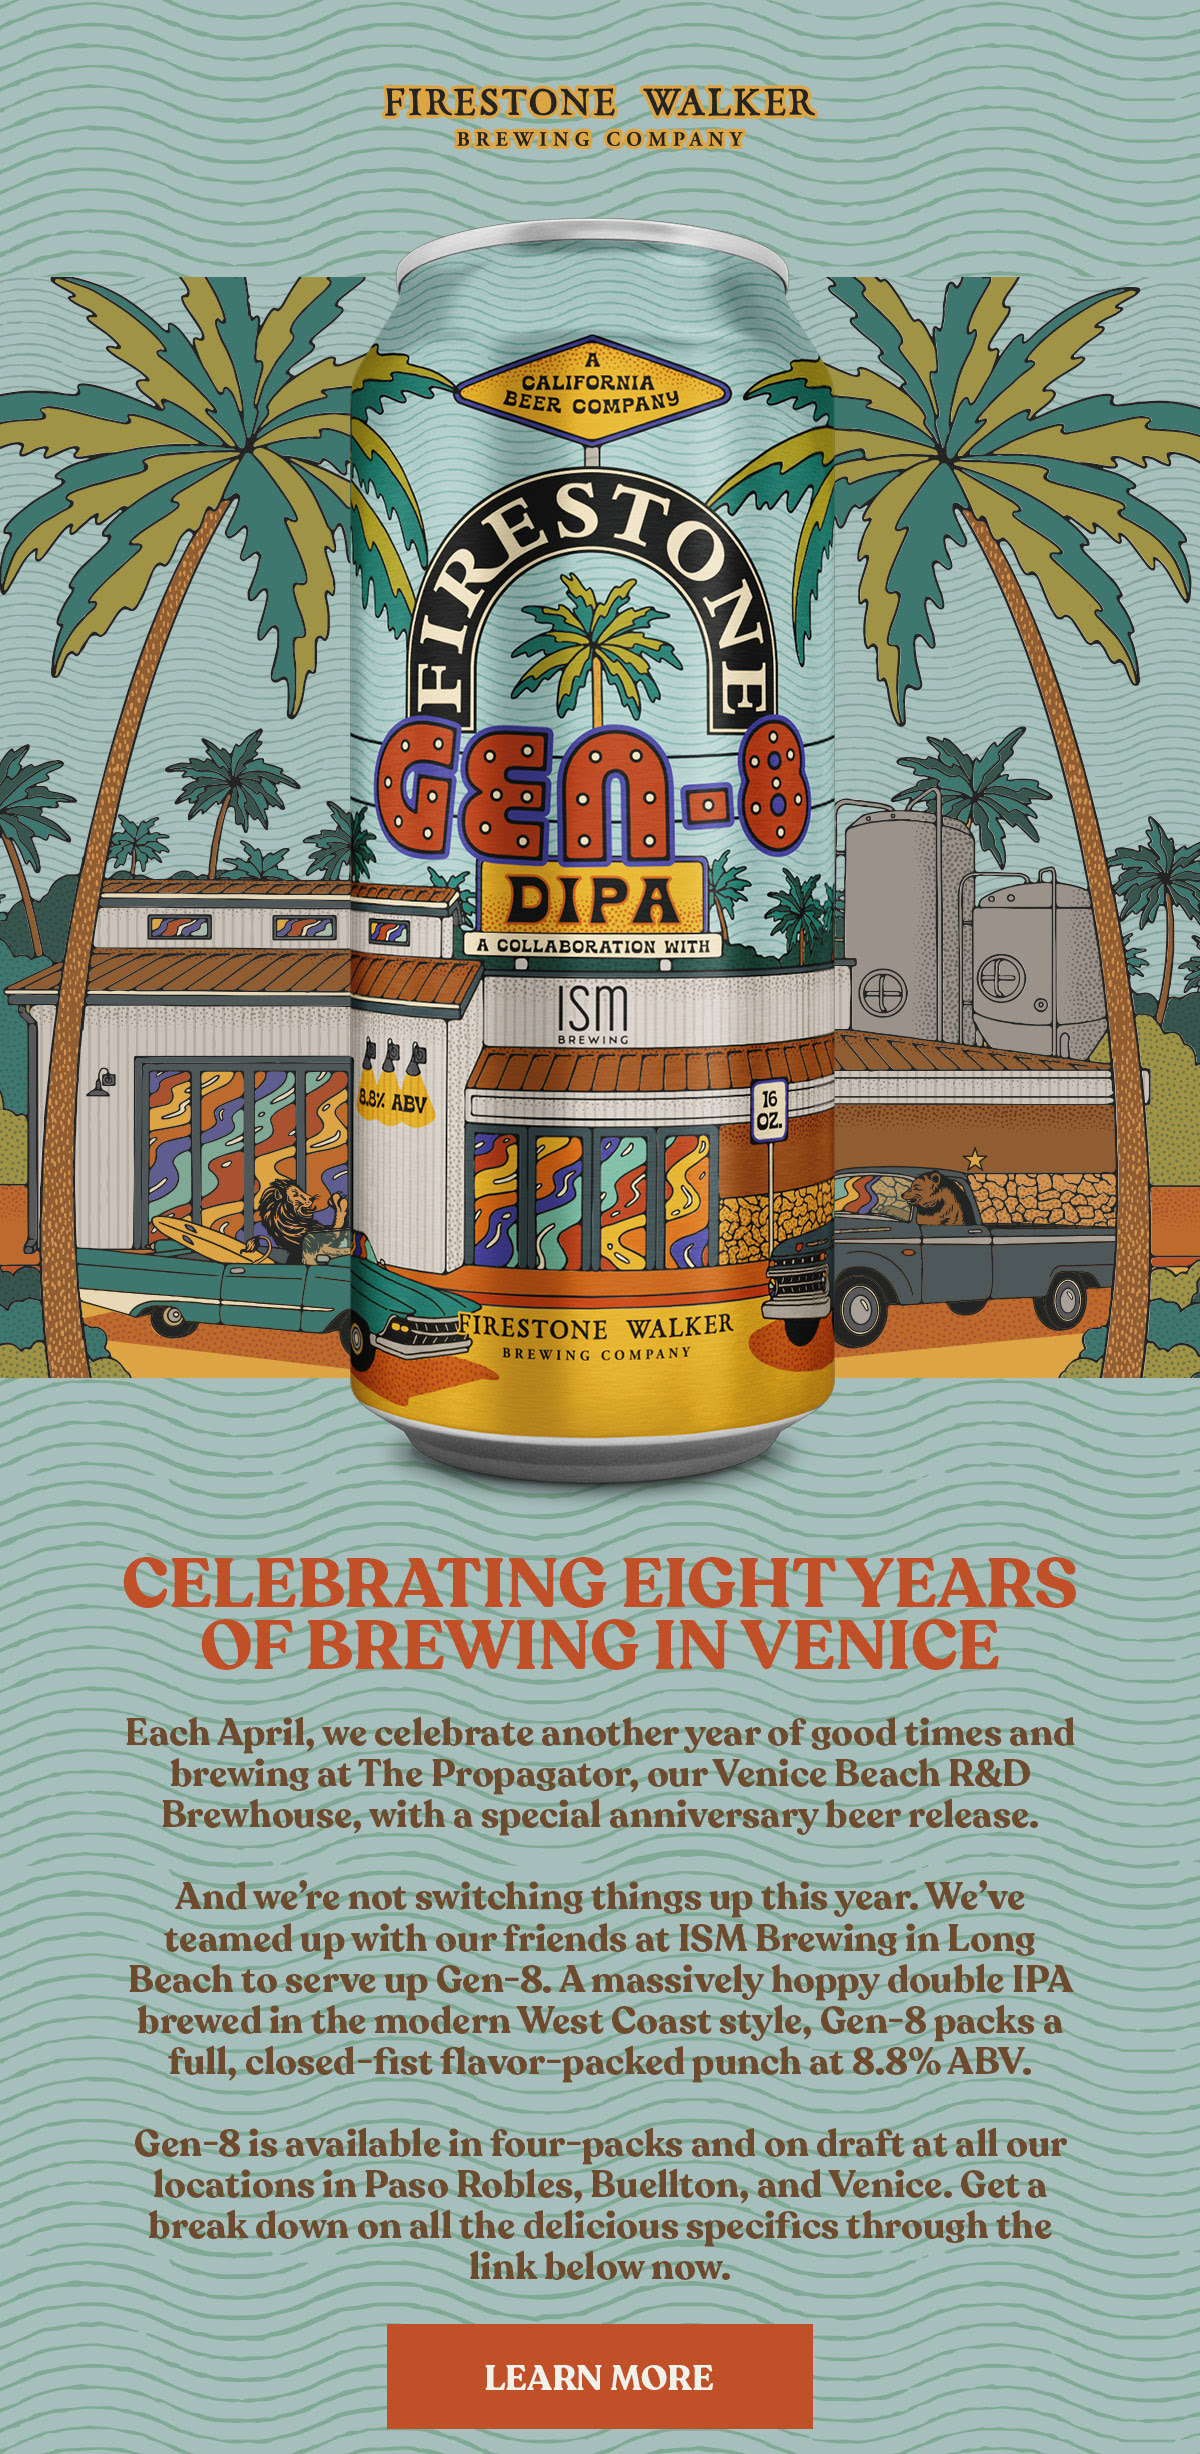 Image shows our last double IPA beer from the Venice Propagator, GEN-8. The text reads, “CELEBRATING EIGHT YEARS OF BREWING IN VENICE Each April, we celebrate another year of good times and brewing at The Propagator, our Venice Beach R&D Brewhouse, with a special anniversary beer release. And we’re not switching things up this year. We’ve teamed up with our friends at ISM Brewing in Long Beach to serve up Gen-8. A massively hoppy double IPA brewed in the modern West Coast style, Gen-8 packs a full, closed-fist flavor-packed punch at 8.8% ABV.  Gen-8 is available in four-packs and on draft at all our locations in Paso Robles, Buellton, and Venice. Get a break down on all the delicious specifics through the link below now.” Click here to check it all out.